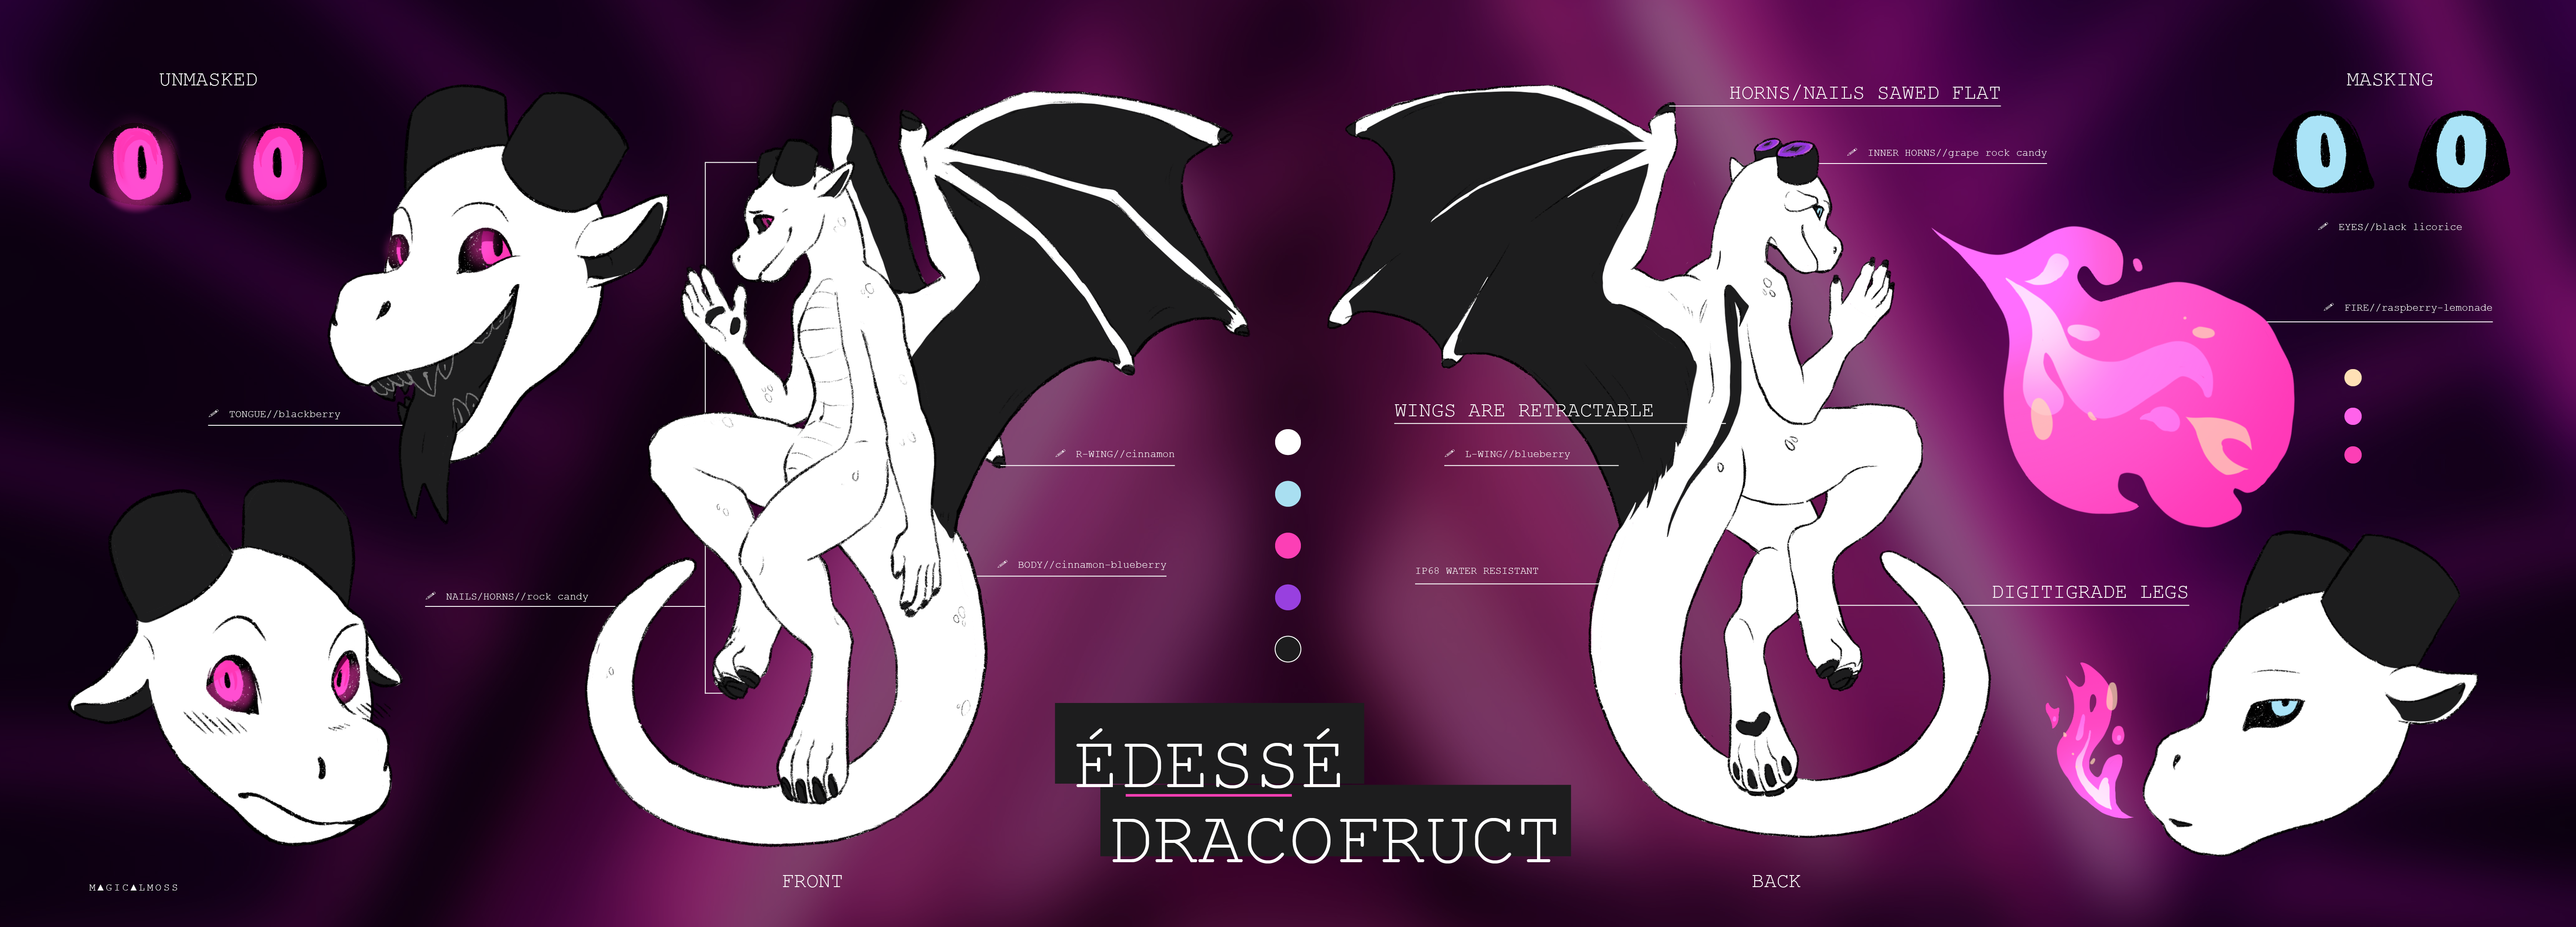 A refsheet of Édessé Dracofruct, showing the character in a couple poses and with a few headshots, as well as a list of flavors.